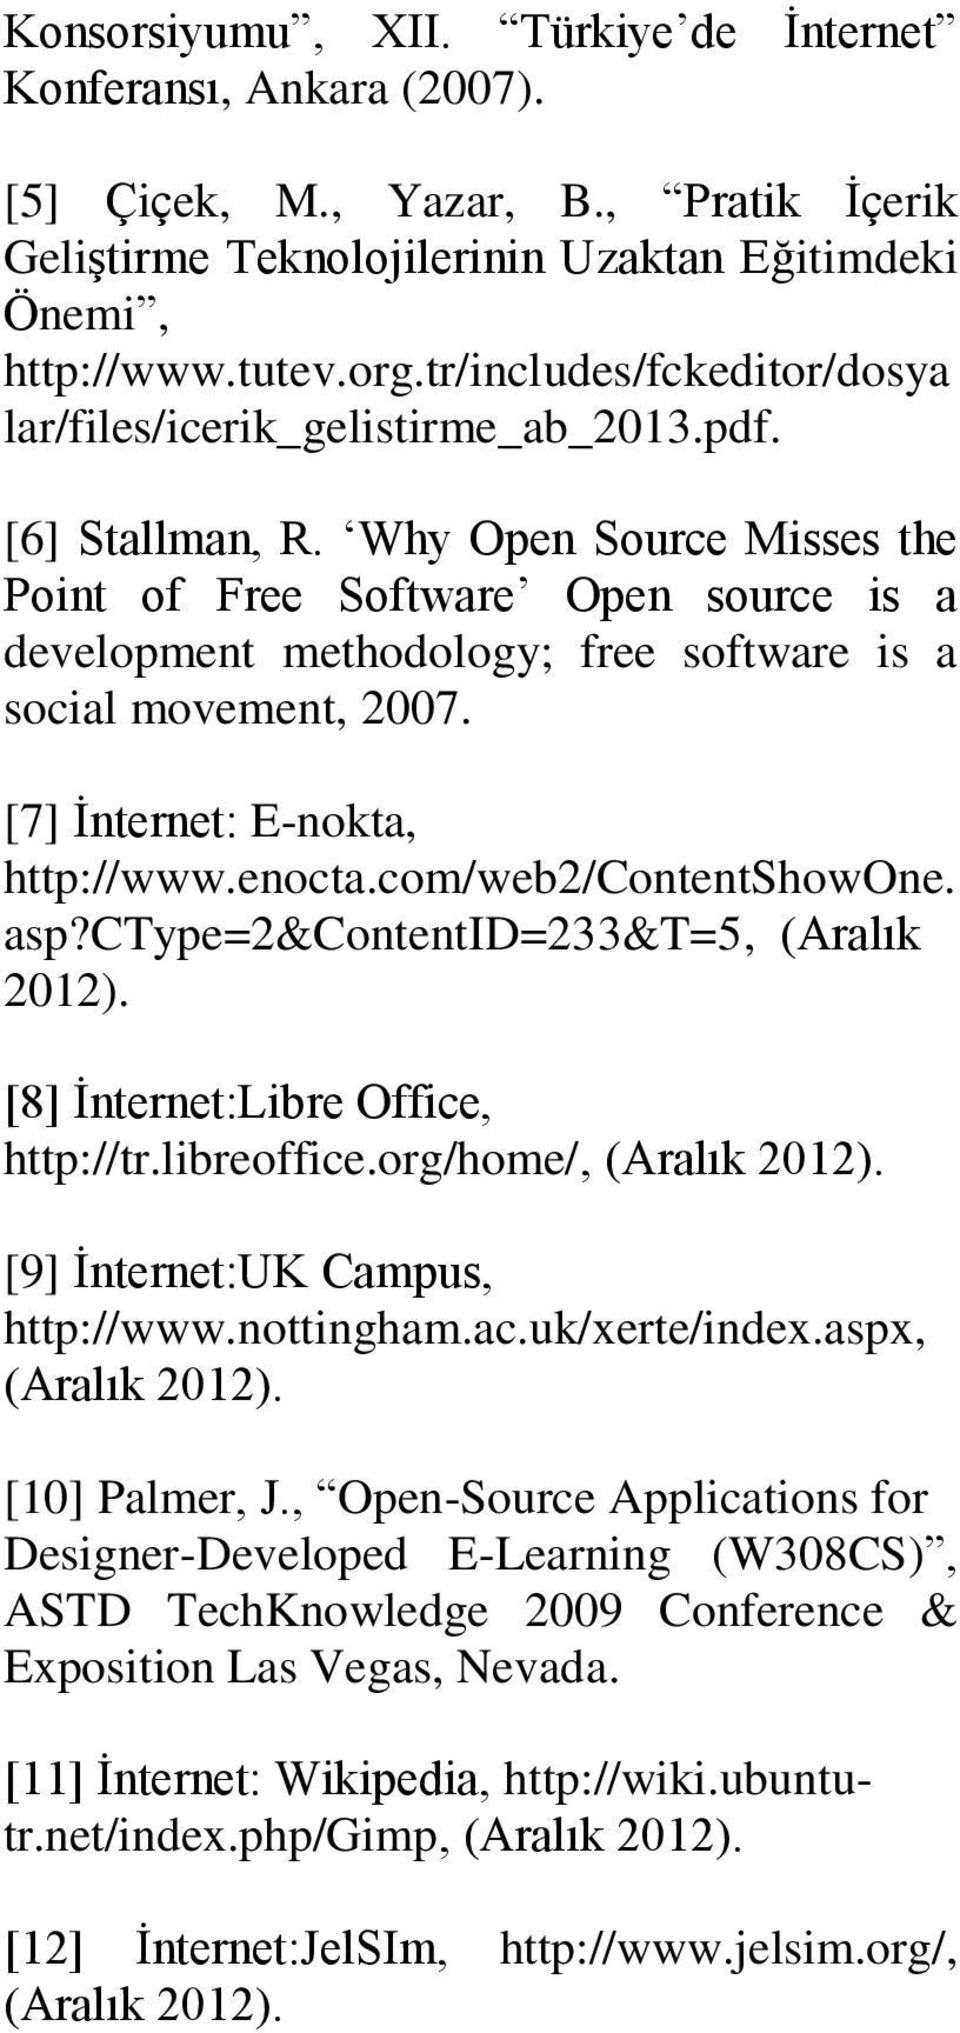 Why Open Source Misses the Point of Free Software Open source is a development methodology; free software is a social movement, 2007. [7] İnternet: E-nokta, http://www.enocta.com/web2/contentshowone.